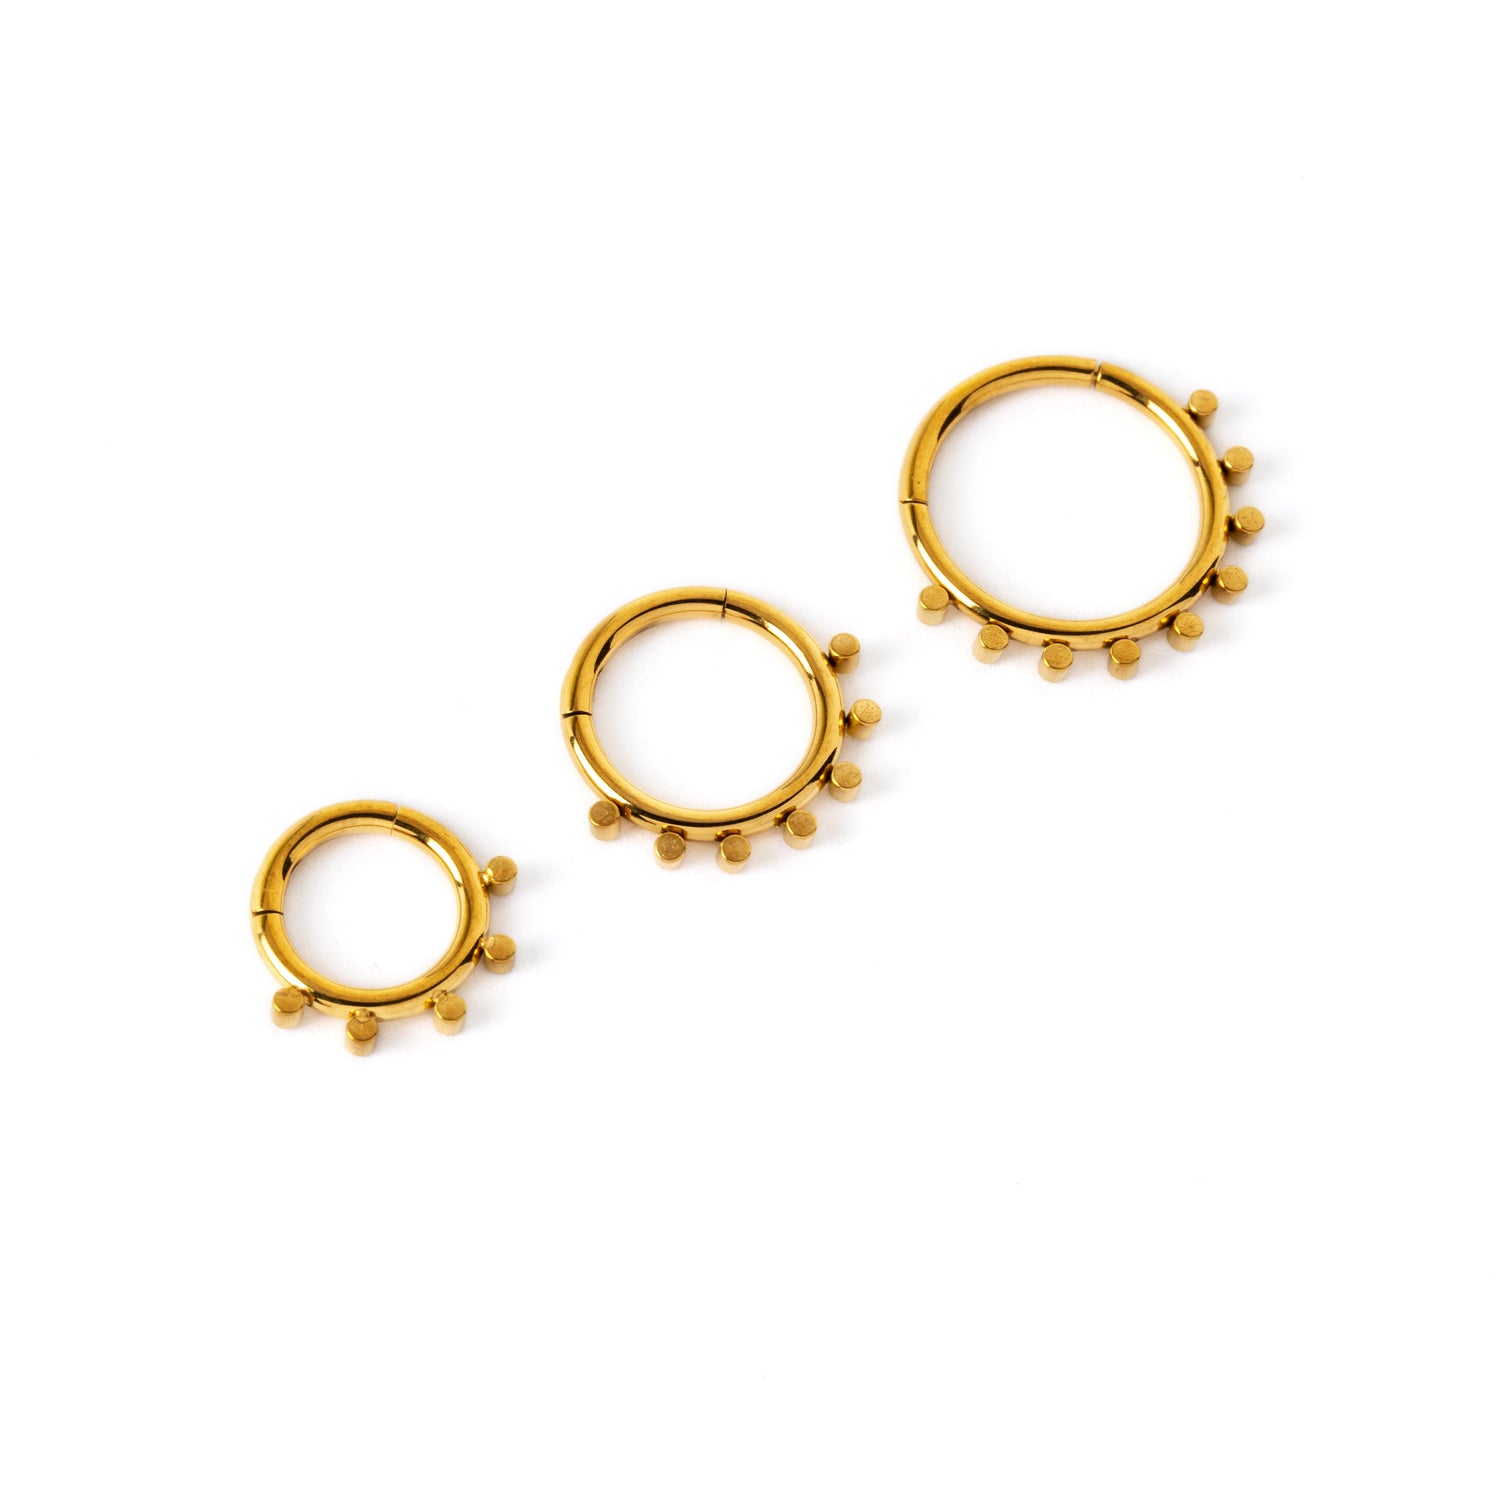 6mm, 8mm,10mm Alya golden surgical steel septum clickers side view